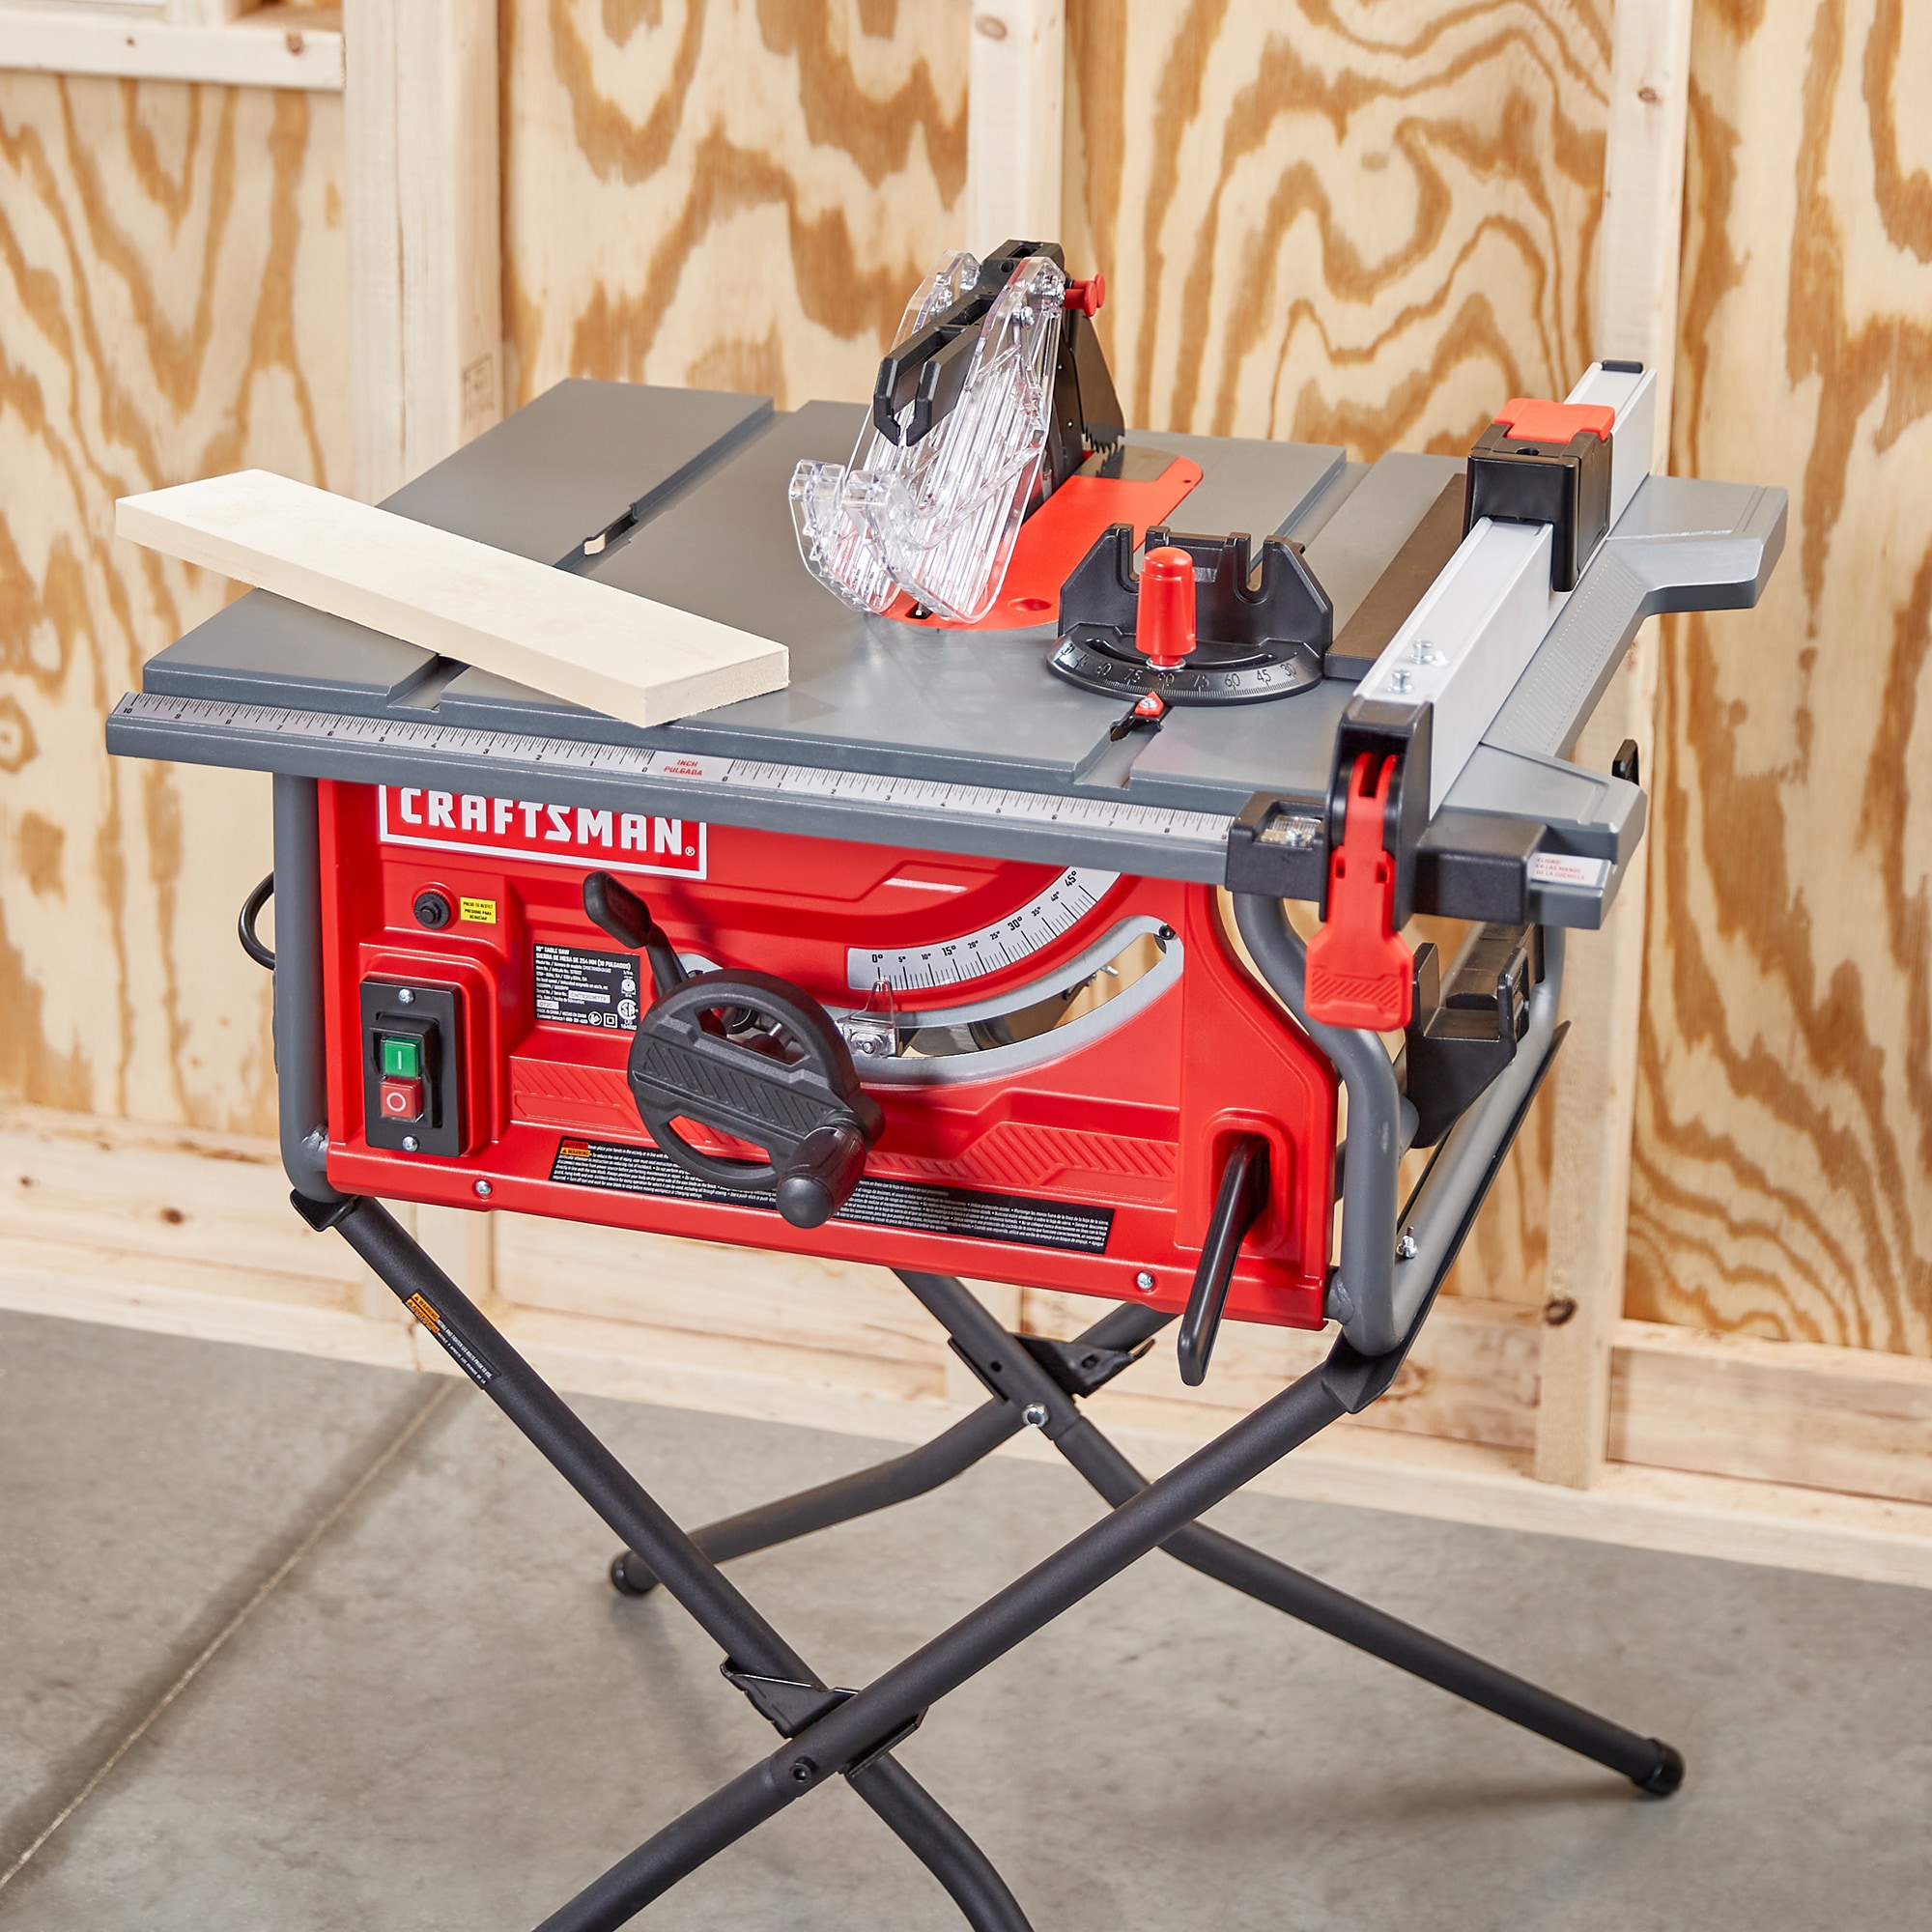 how much is a craftsman table saw worth? 2